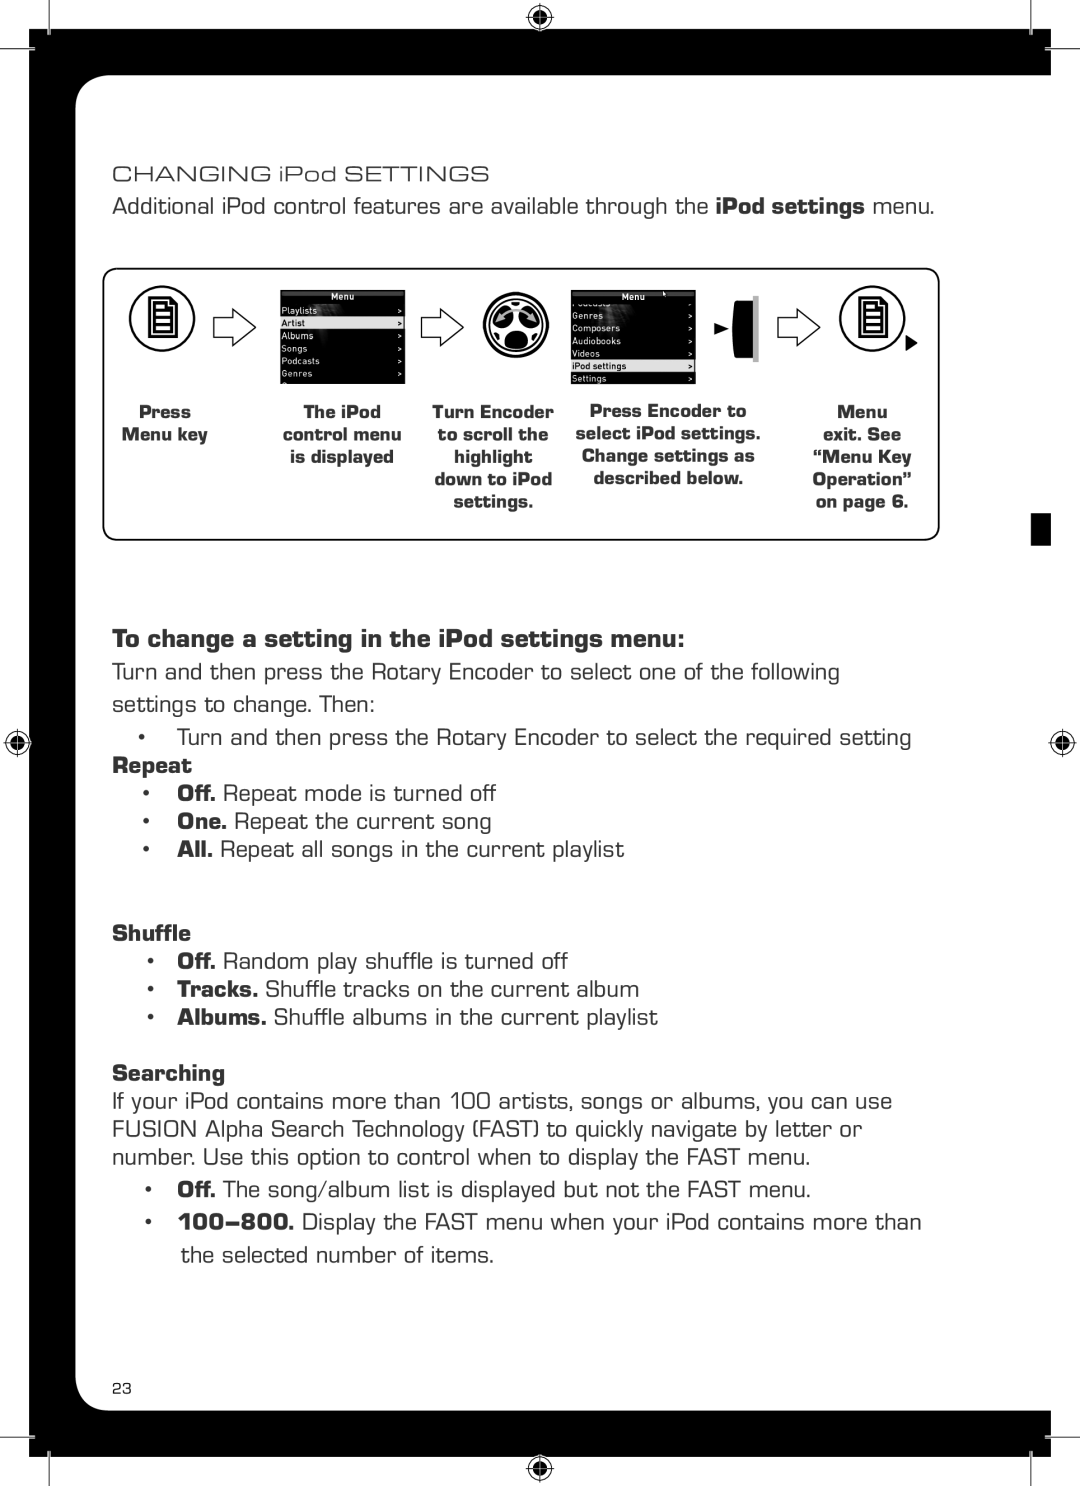 Fusion MS-IP700, MS-AV700 manual To change a setting in the iPod settings menu, Repeat, Shuffle, Searching 